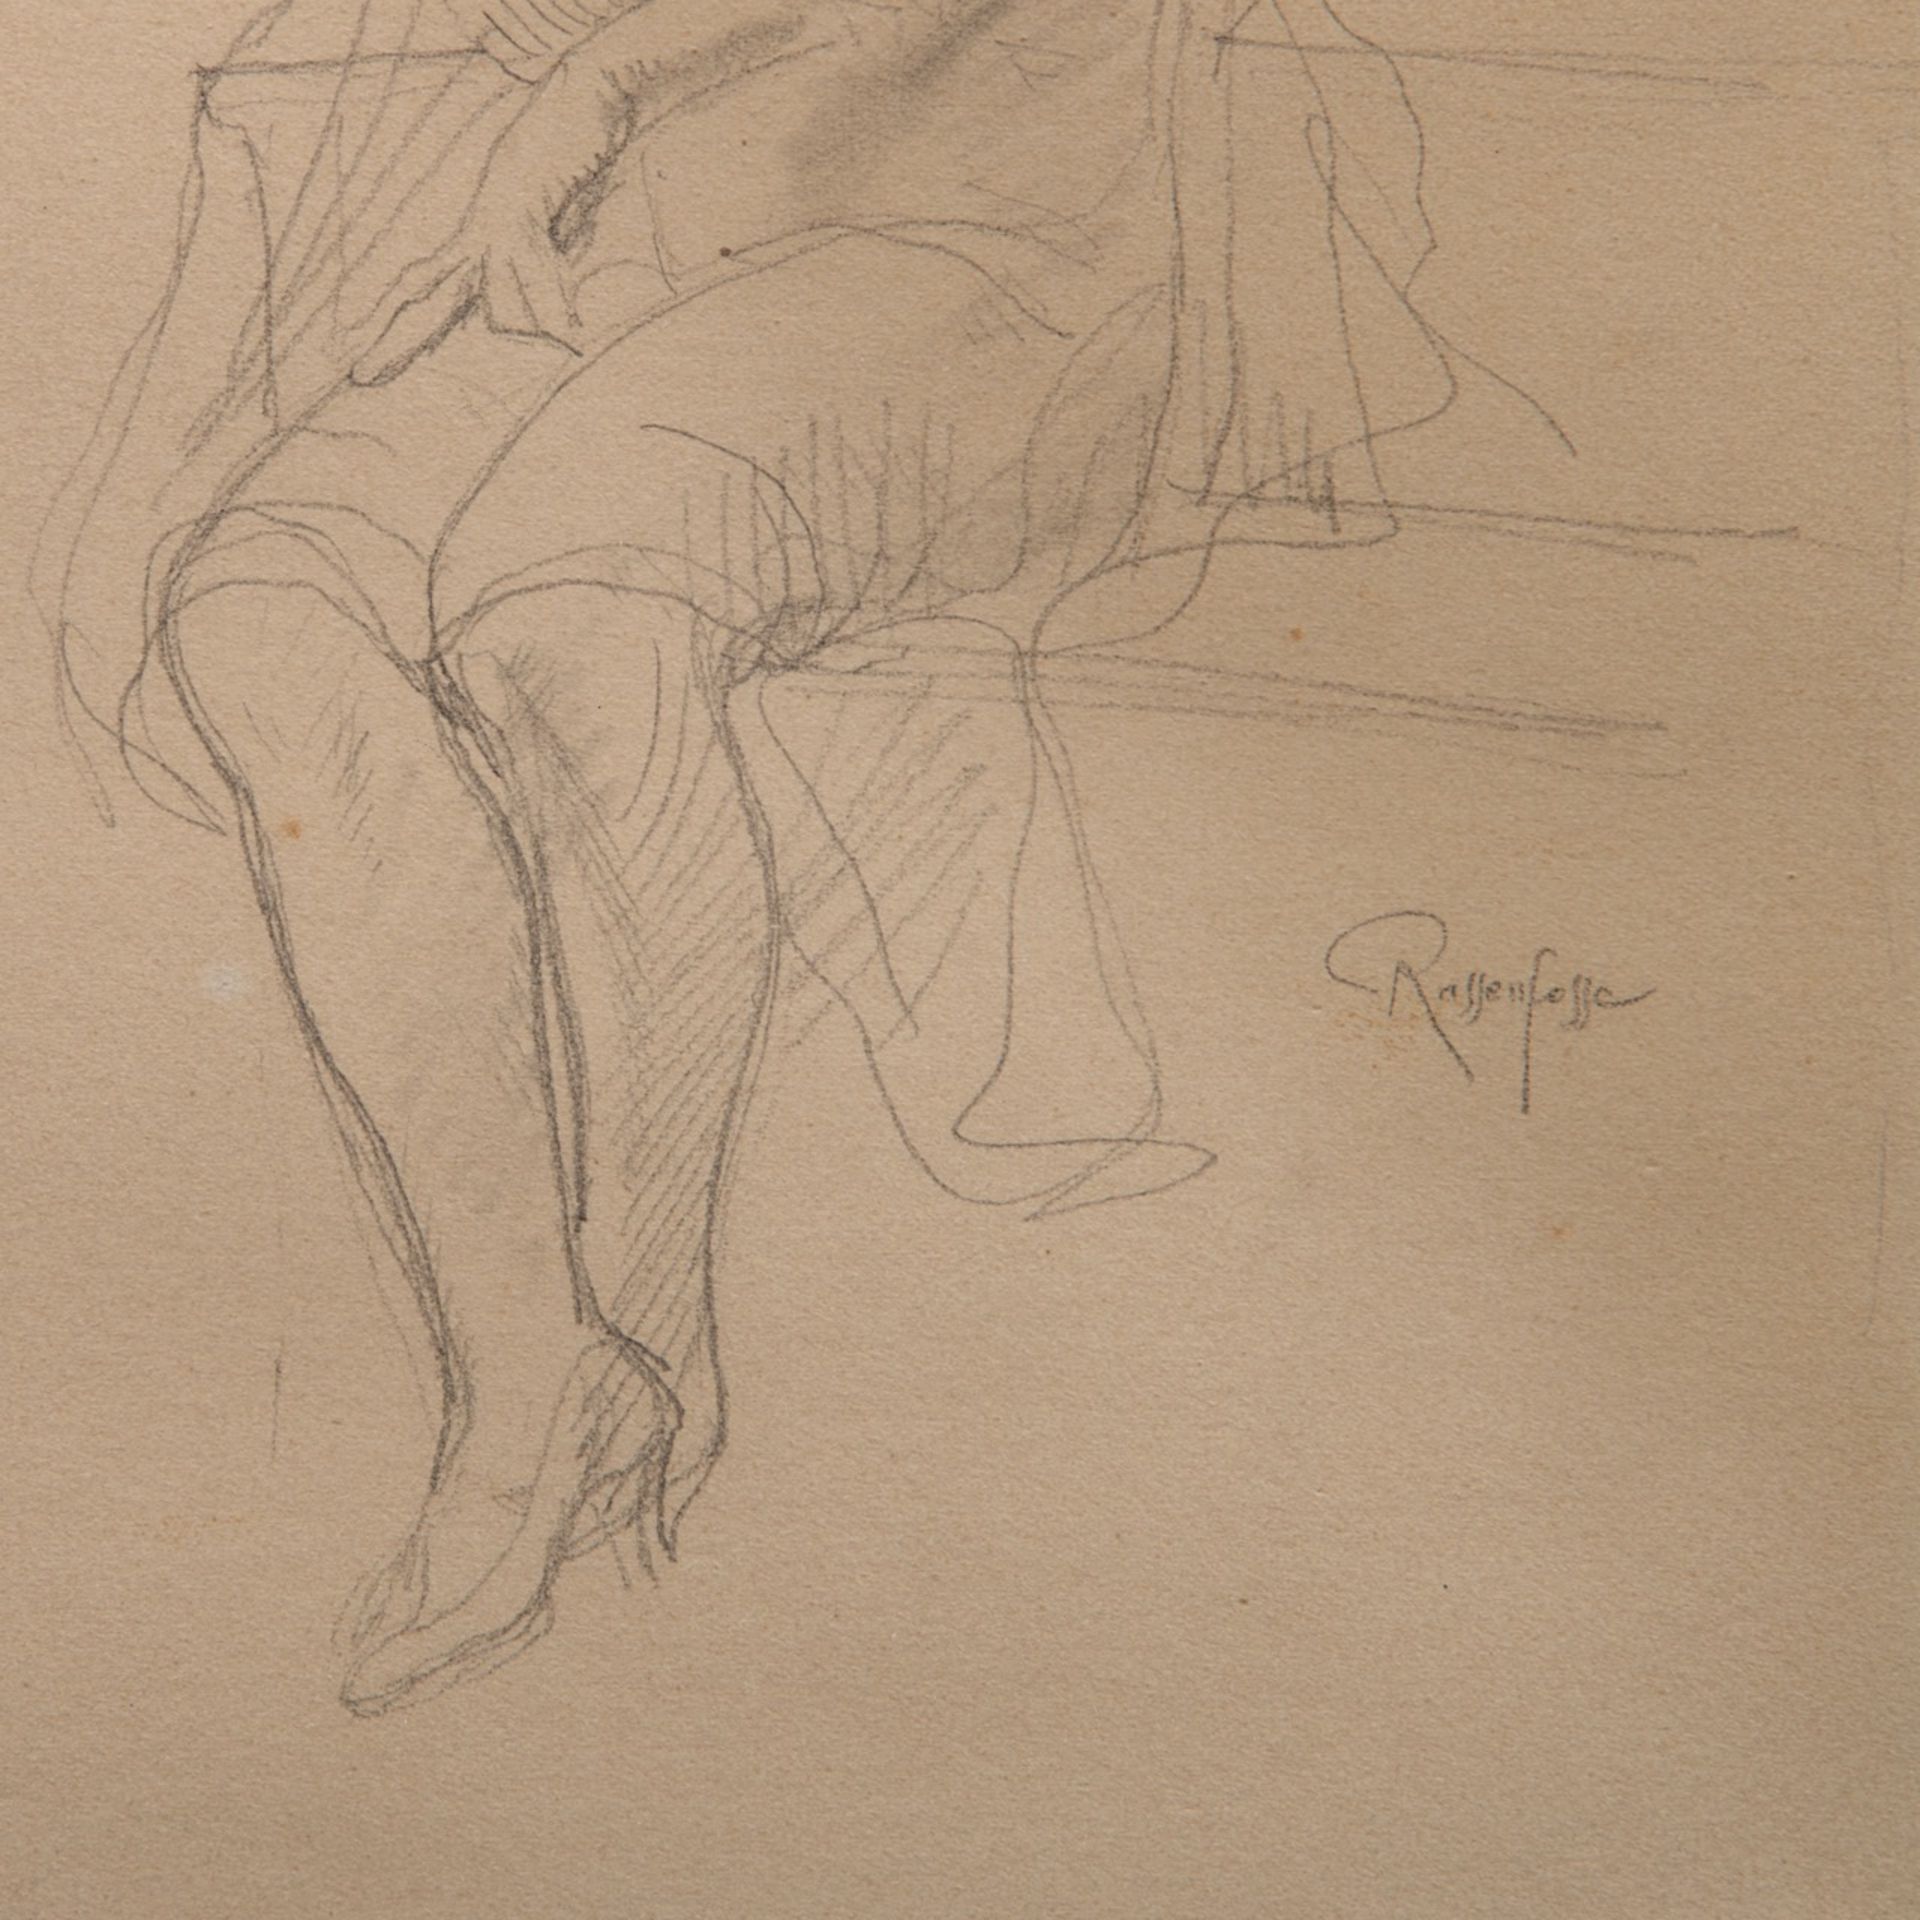 Armand Rassenfosse (1862-1934), seated girl, pencil drawing on paper 26 x 16.5 cm. (10.2 x 6 1/2 in. - Image 6 of 6